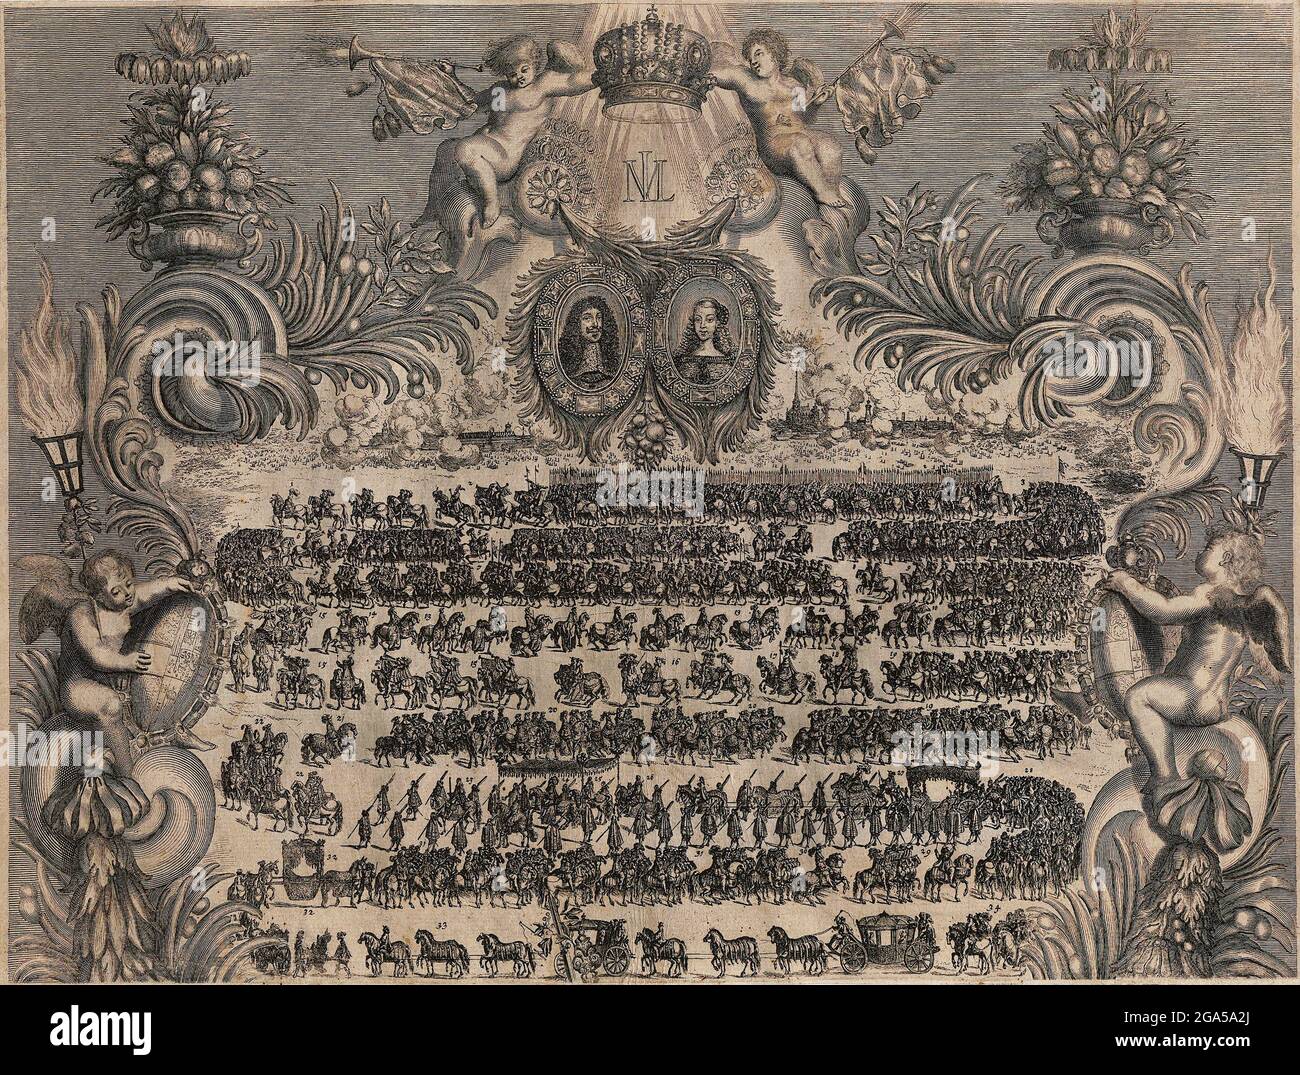 Germany: 'Emperor Leopold's Wedding with Margaret Theresa of Spain, 1666/1667', copper engraving, c. 1660s. Leopold I (1640-1705) was the second son of Emperor Ferdinand III, and became heir apparent after the death of his older brother, Ferdinand IV. He was elected Holy Roman Emperor in 1658 after his father's death, and by then had also already become Archduke of Austria and claimed the crowns of Germany, Croatia, Bohemia and Hungary. Stock Photo